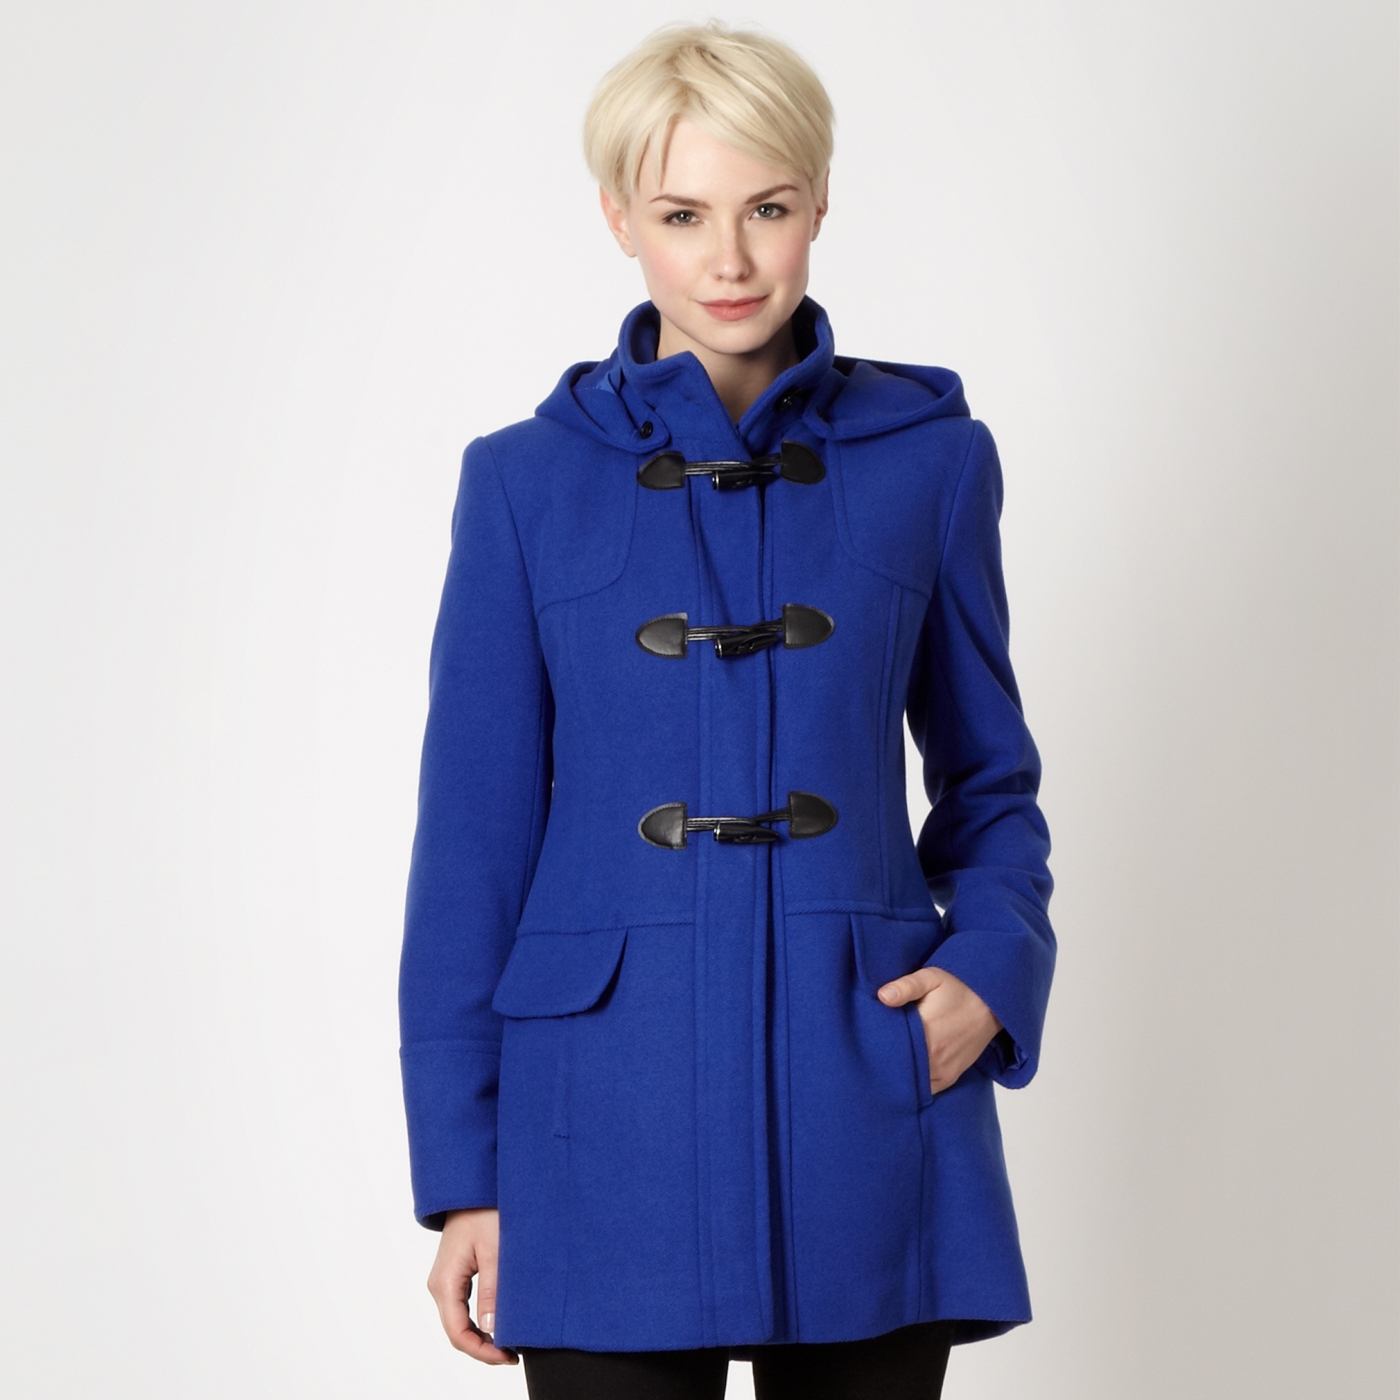 The Collection Blue textured duffle coat